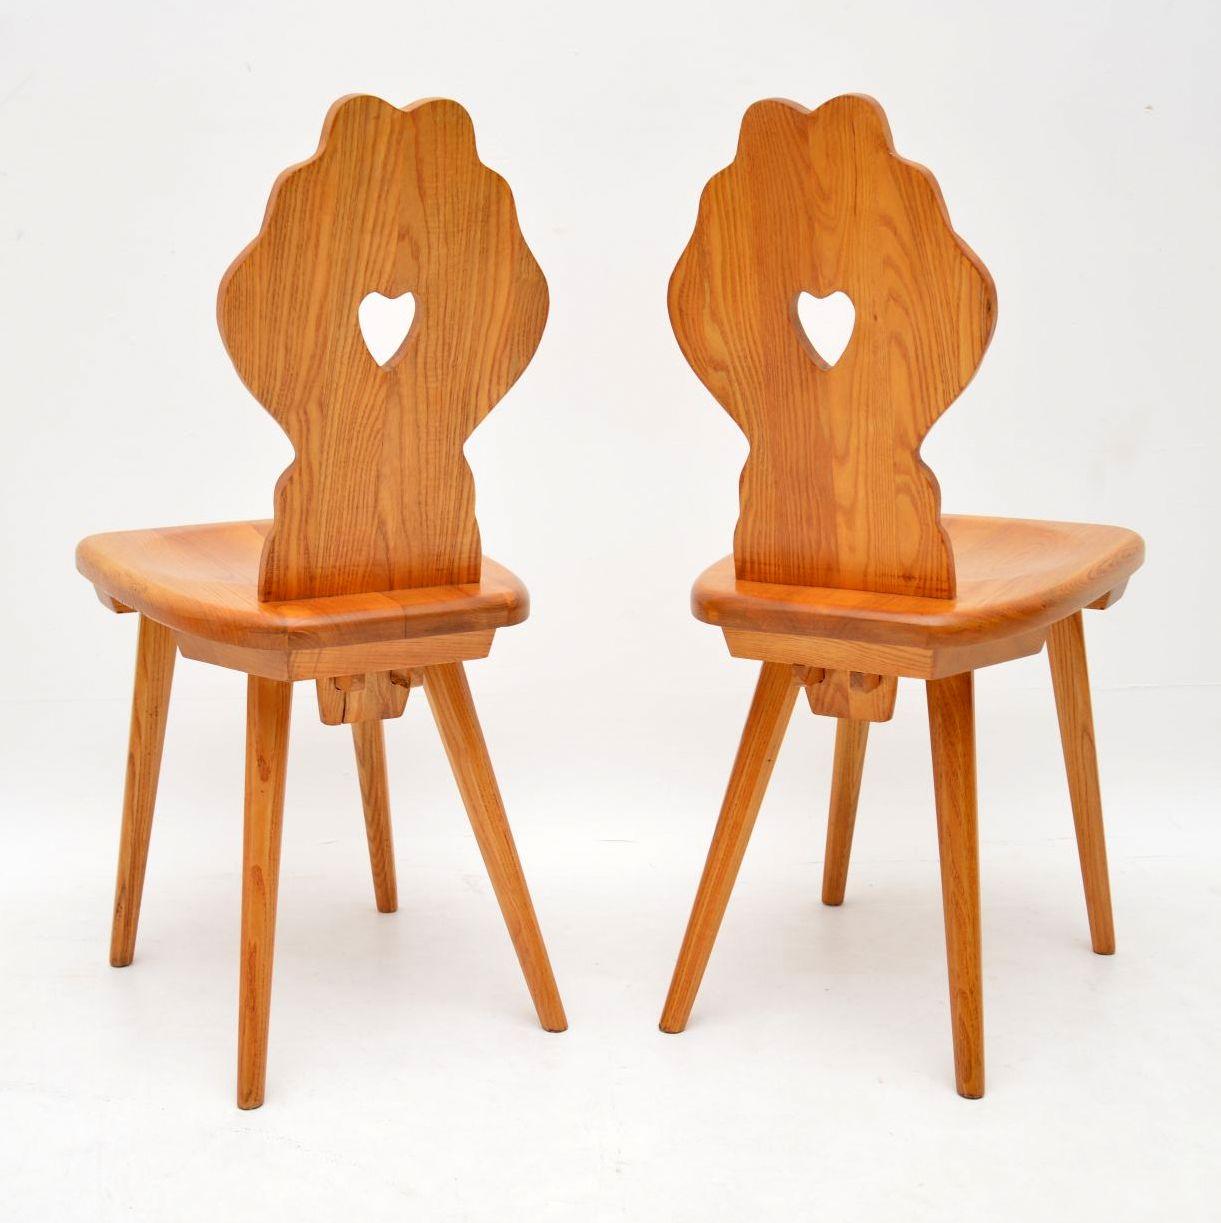 A stunning pair of vintage side chairs in solid Elm. These were made in Switzerland and date from circa 1950s. They are of amazing quality and have a beautiful design, with elegant splayed legs, shapely backs and cut out heart motifs. We have had